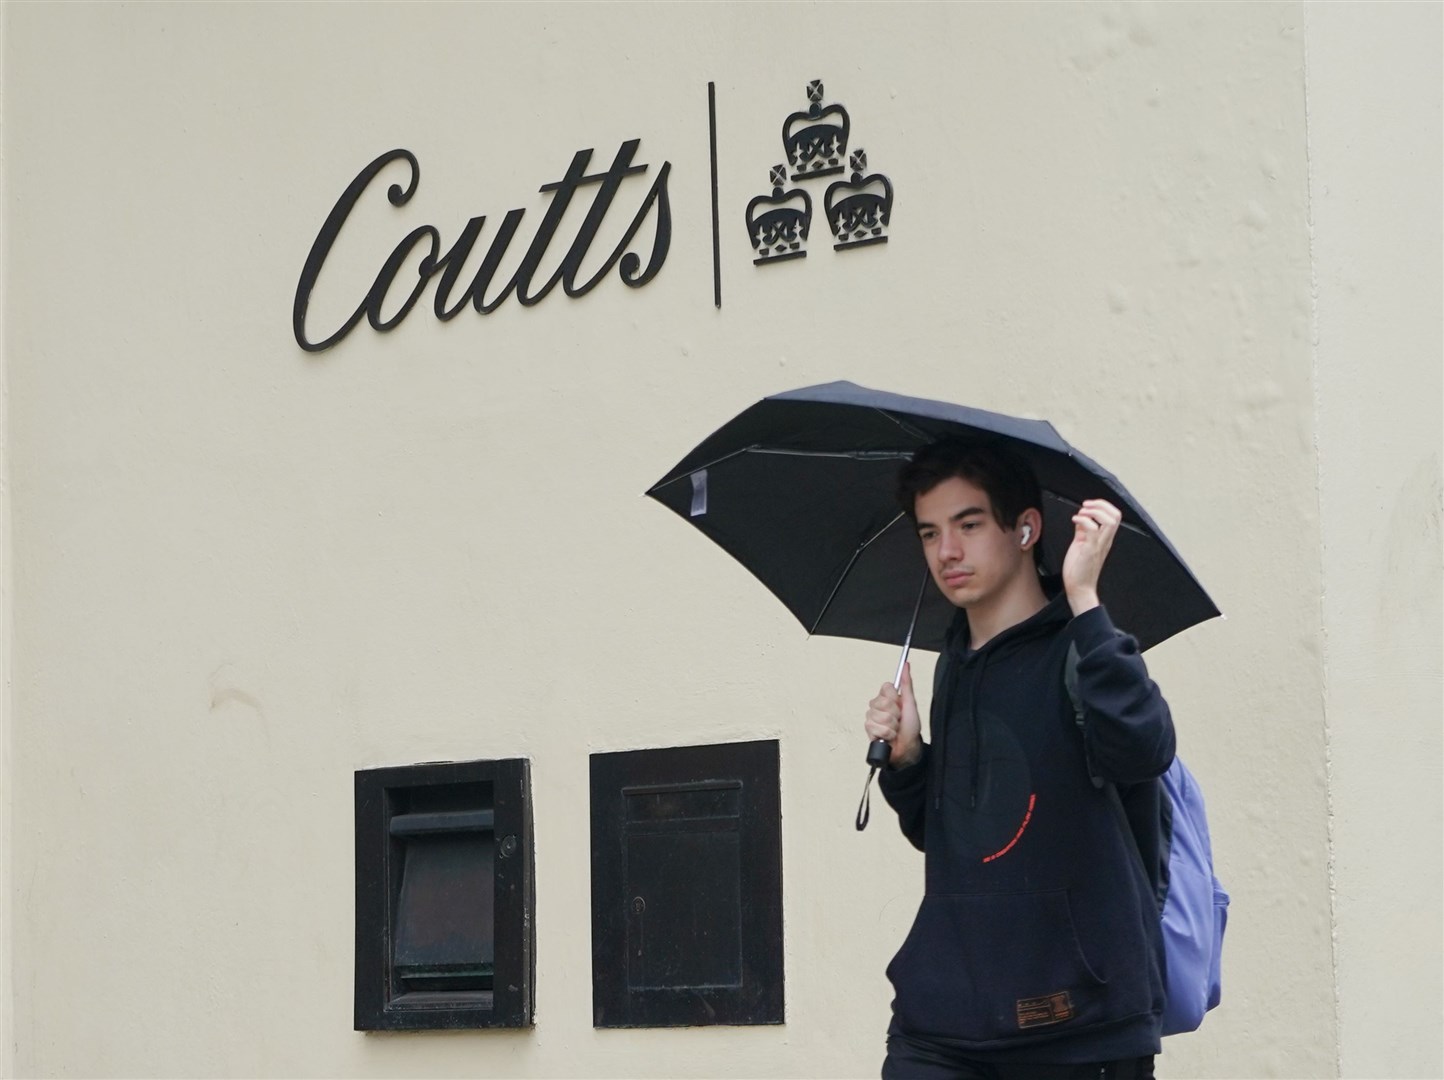 Coutts Bank decided to sever its ties with former Ukip leader Nigel Farage after his mortgage was paid off (Yui Mok/PA)